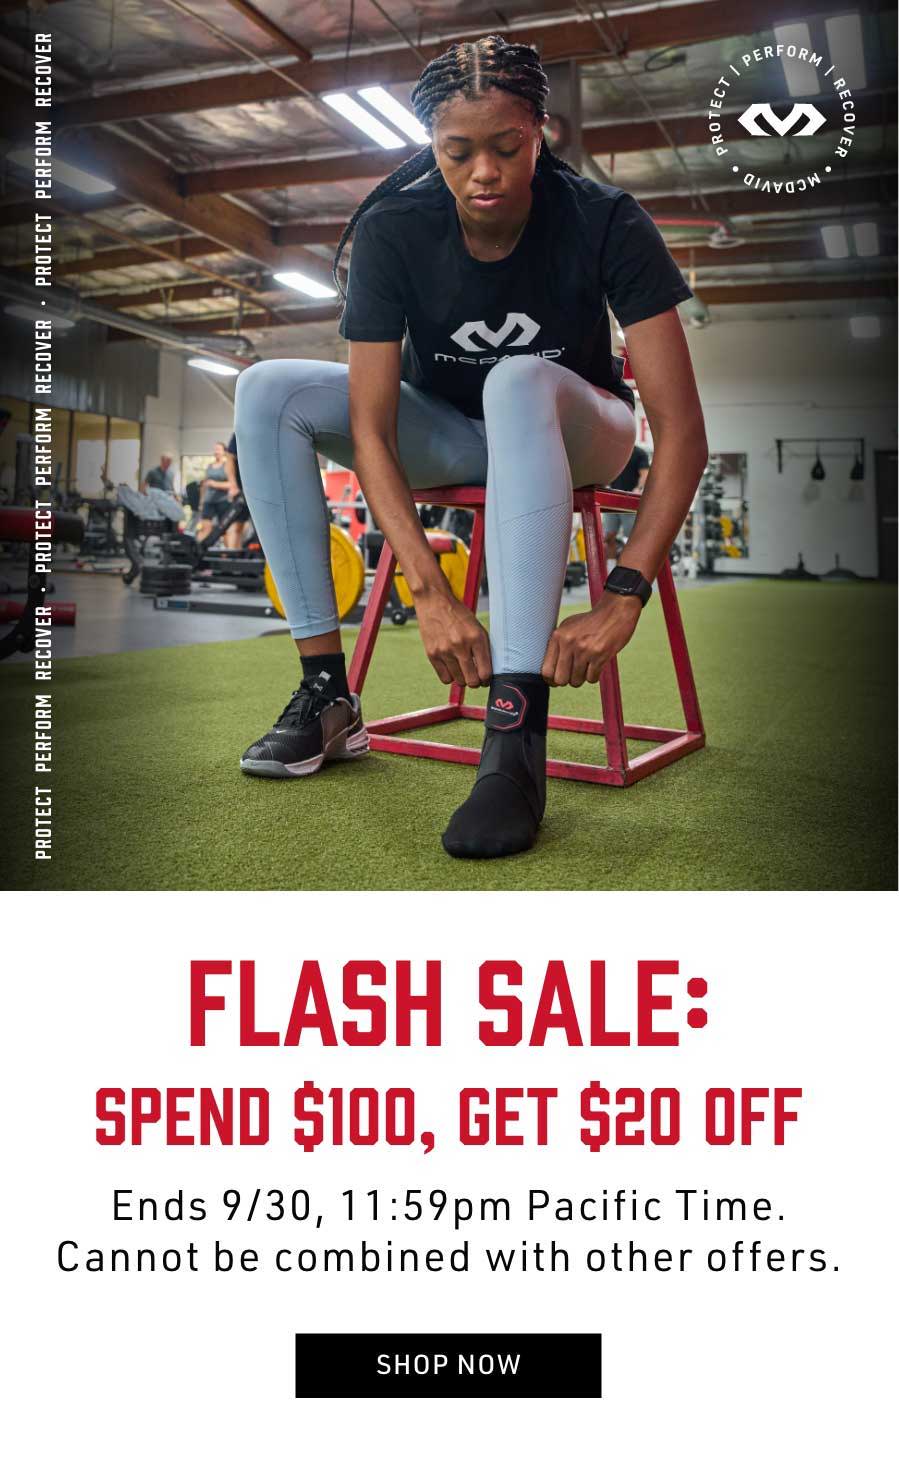 FLASH SALE: Spend $100, Get $20 Off - Ends 9/30 11:59 PM PST. Cannot Be Combined With Other Offers | SHOP NOW